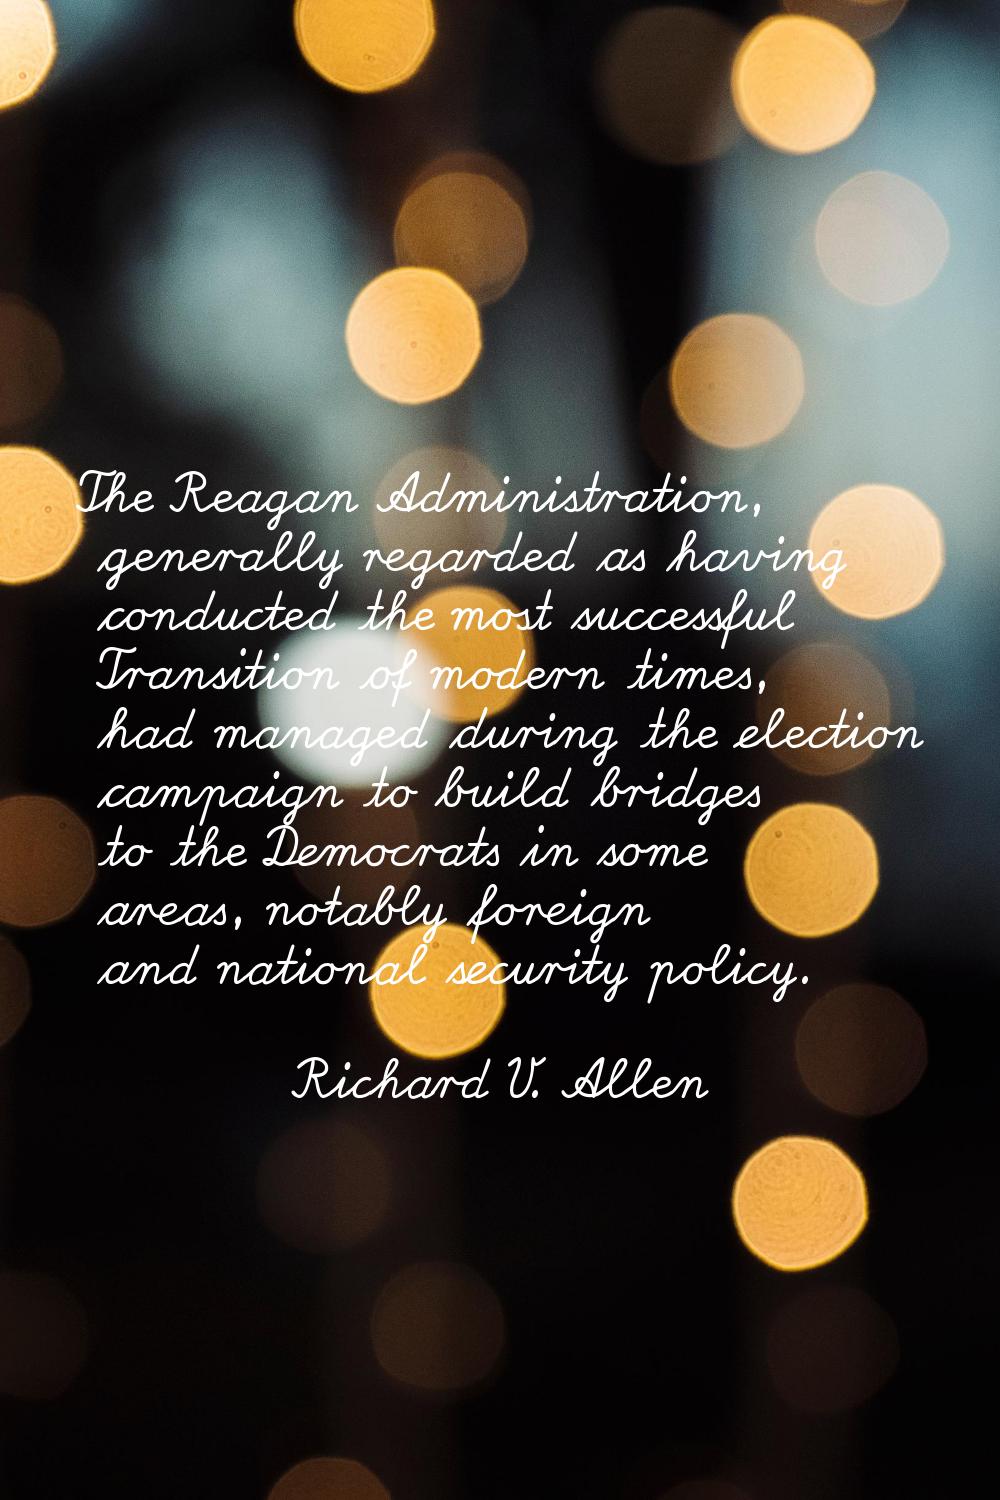 The Reagan Administration, generally regarded as having conducted the most successful Transition of